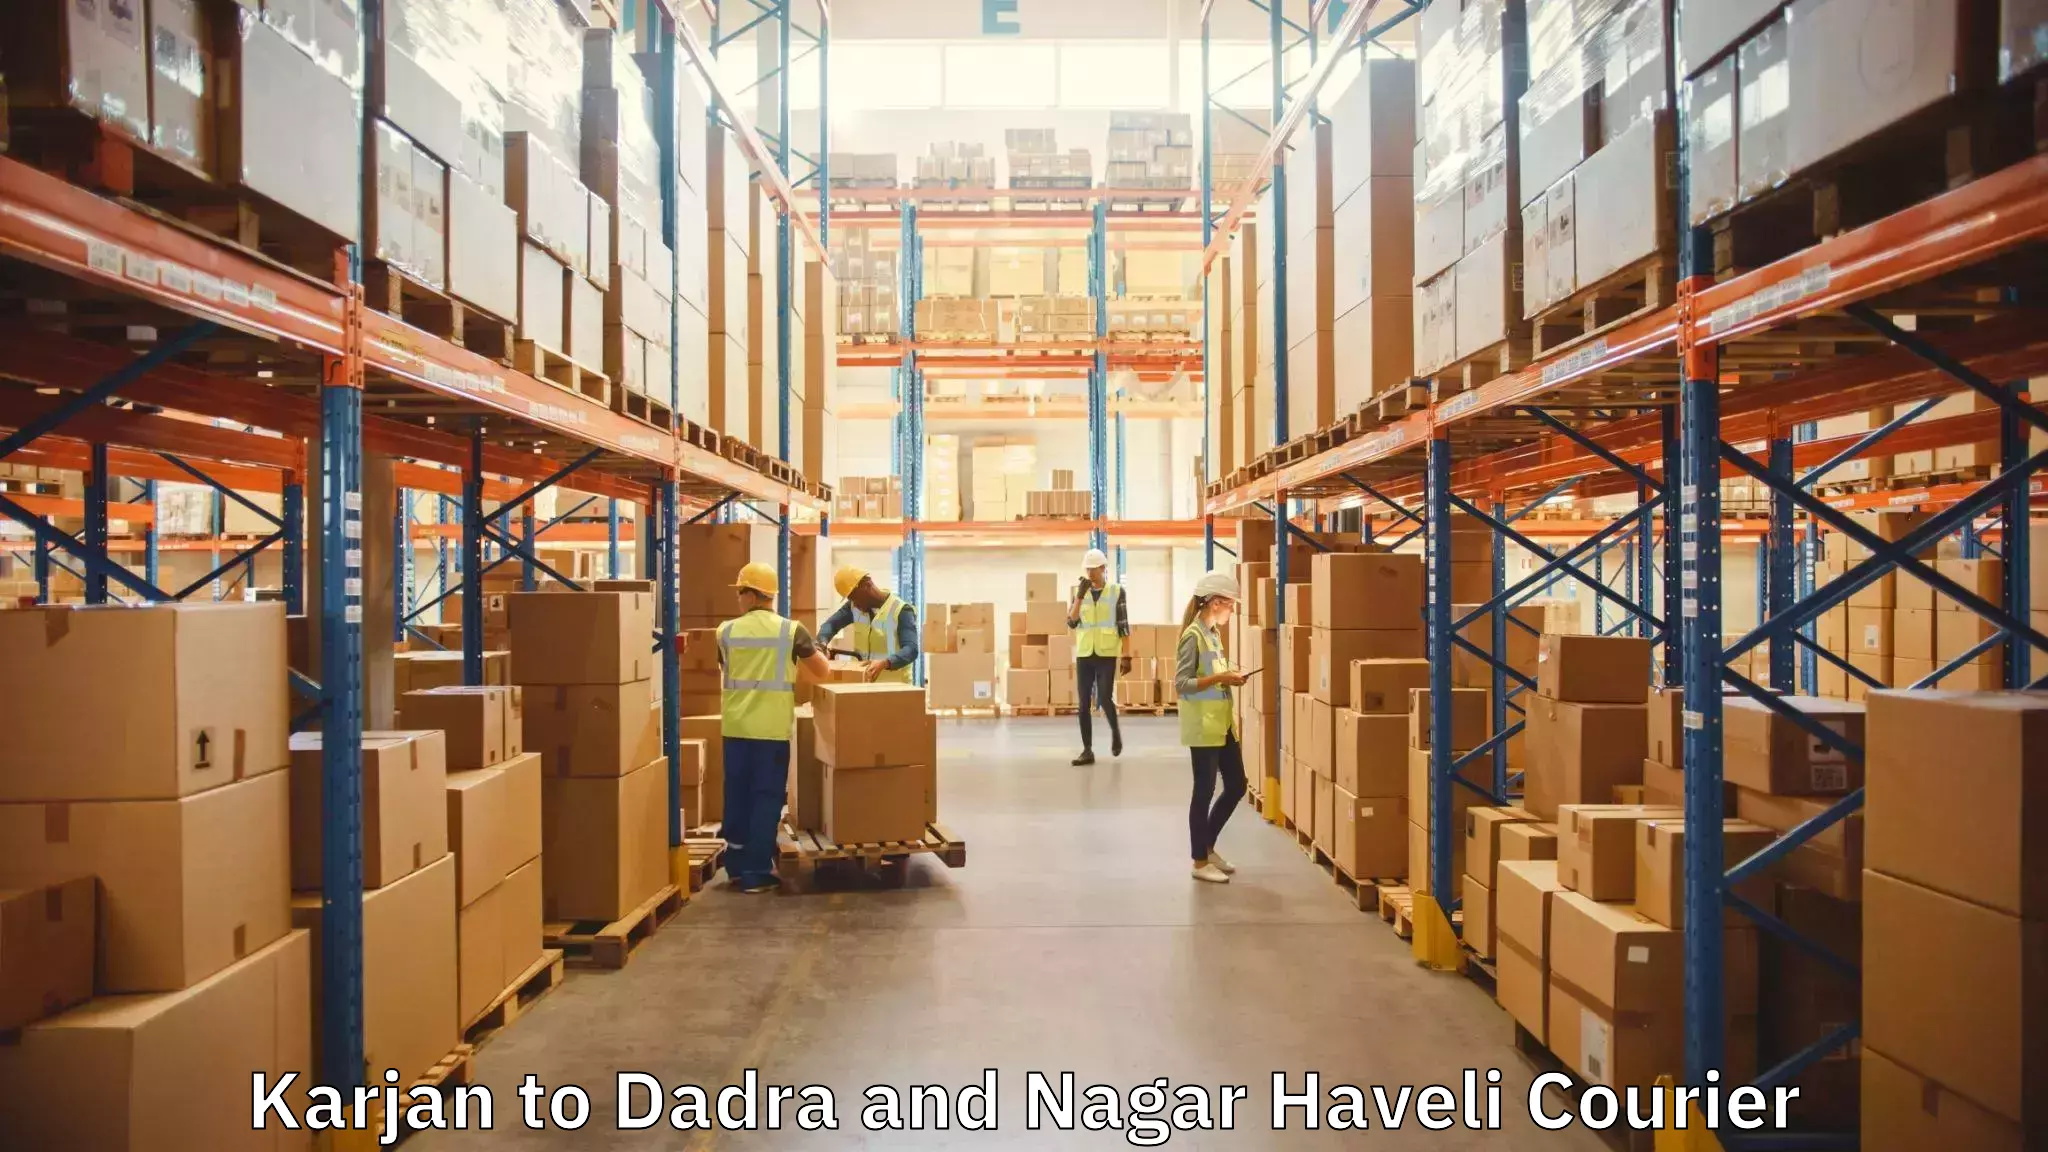 Trusted relocation experts Karjan to Dadra and Nagar Haveli